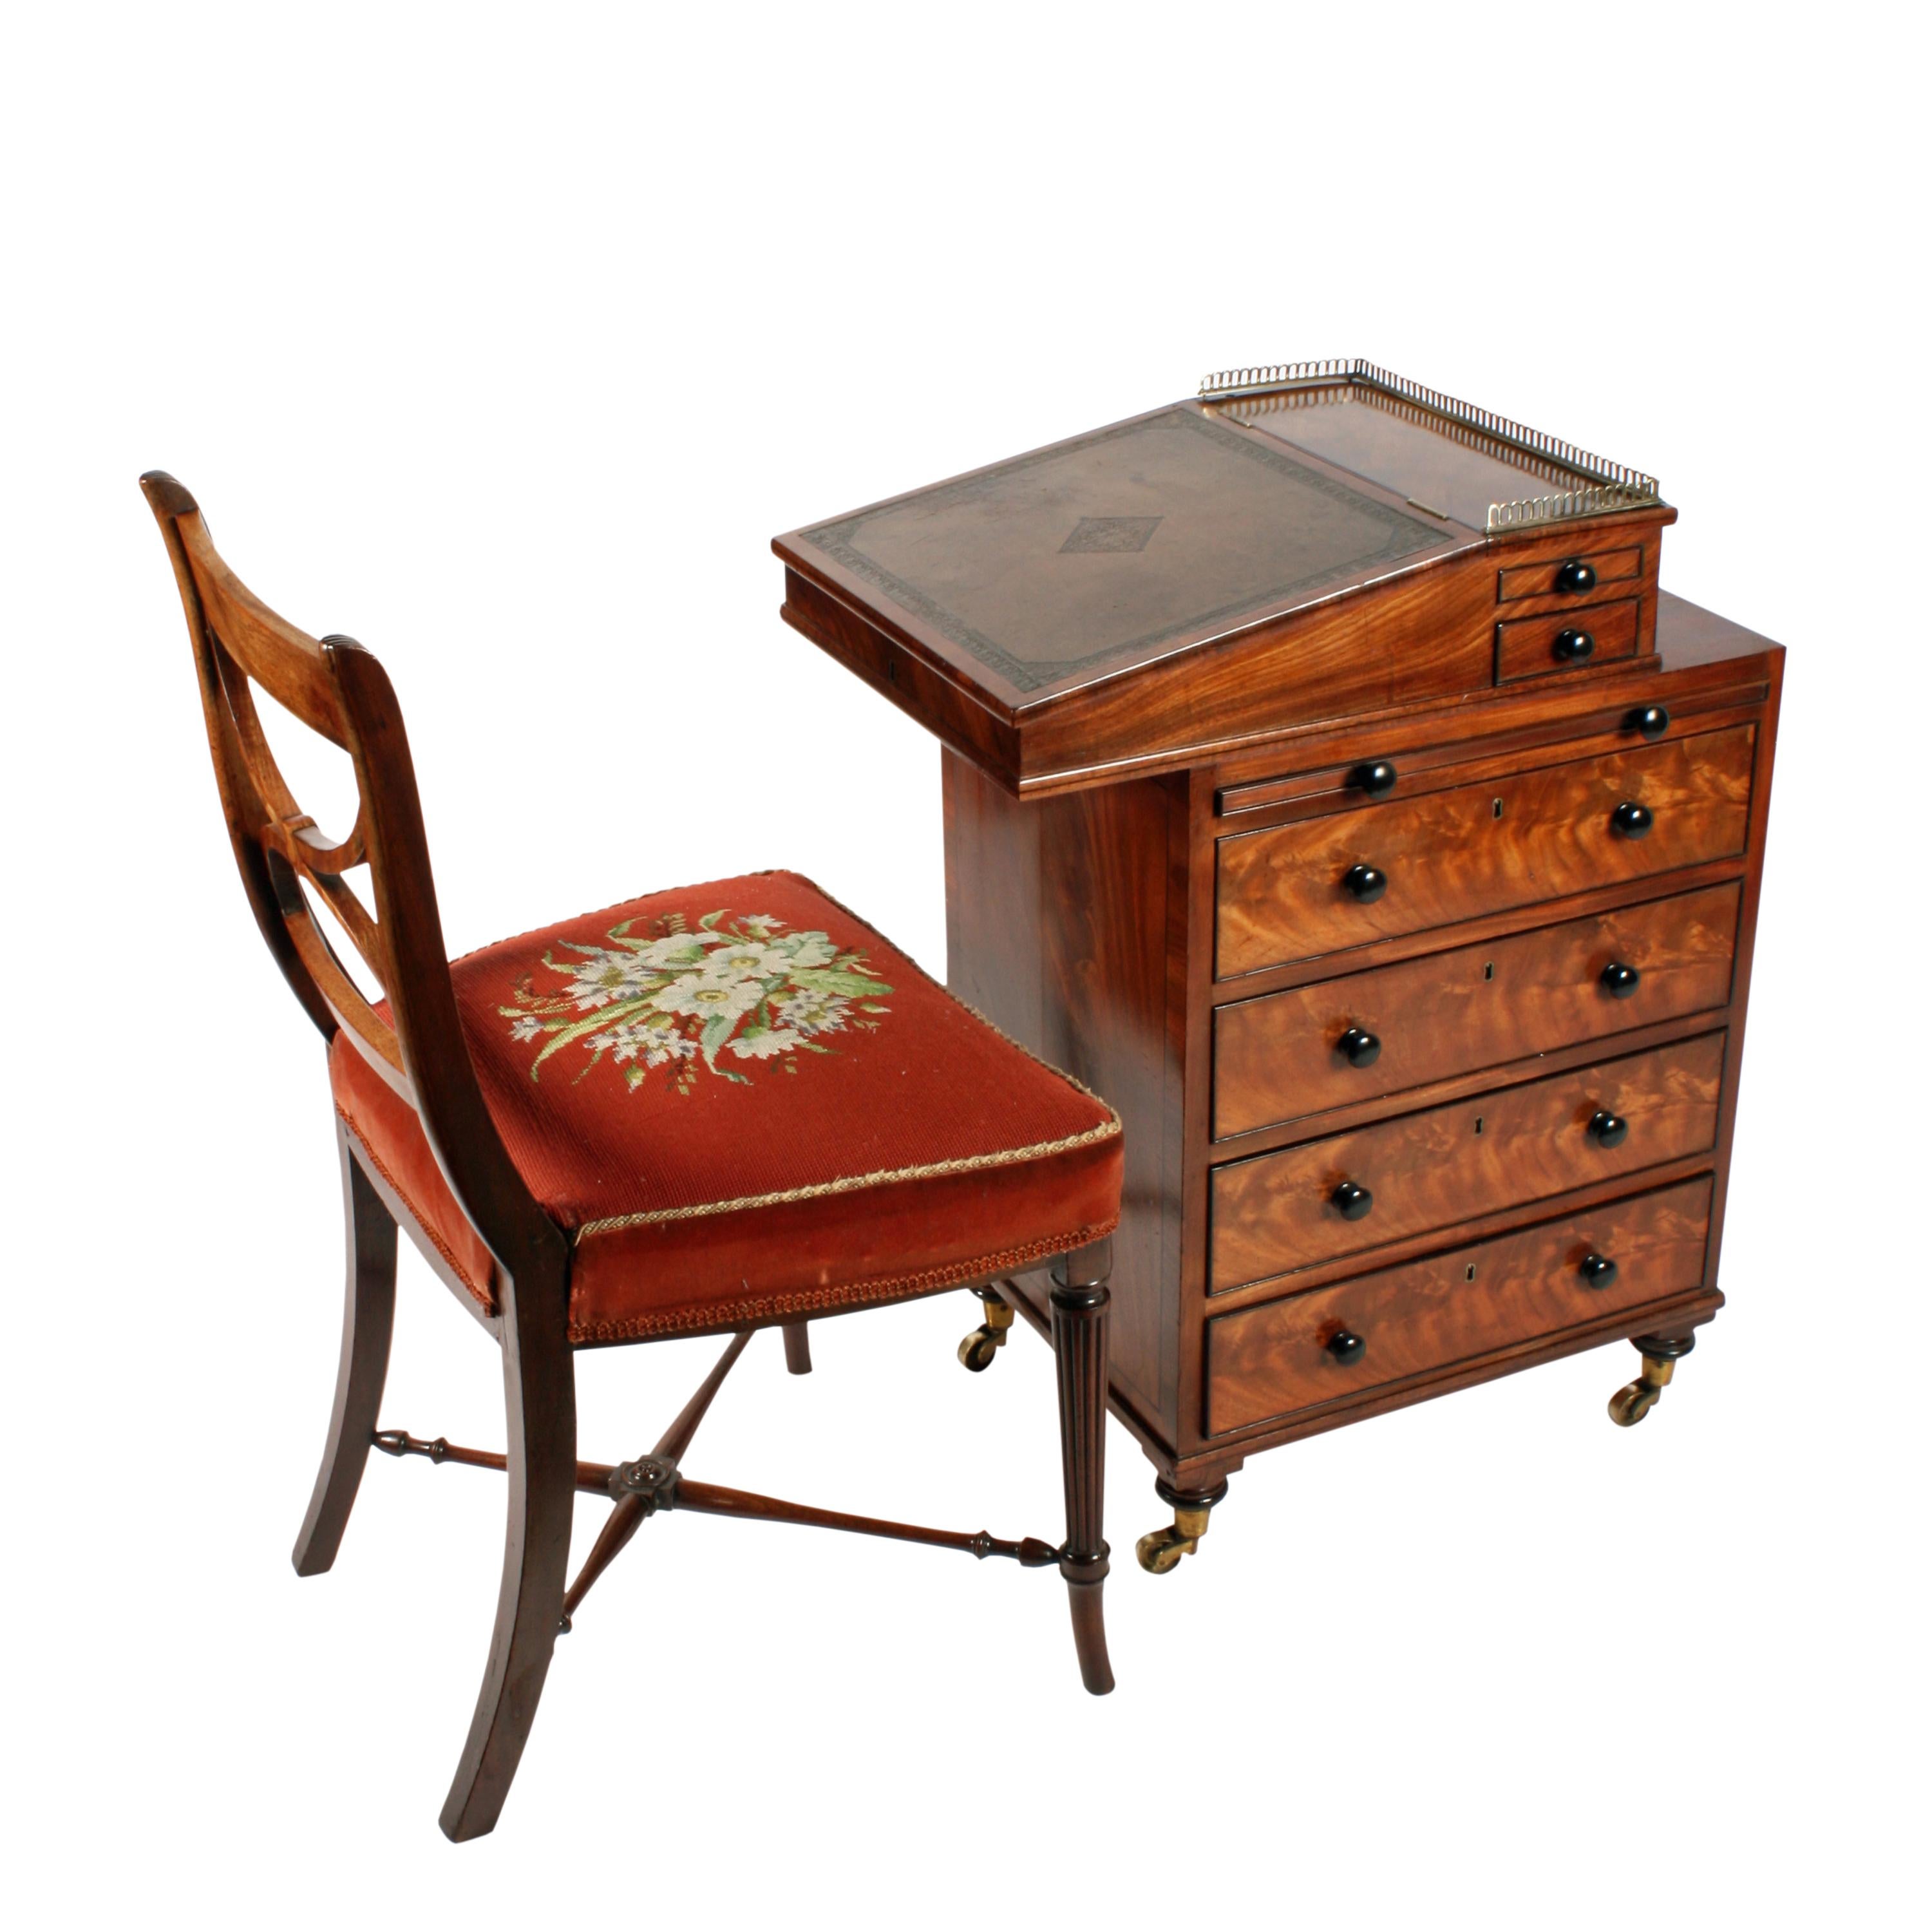 Fine Regency mahogany Davenport desk


A fine quality early 19th century Regency mahogany Davenport with a London retail label.

An interior drawer has a paper retail label for 